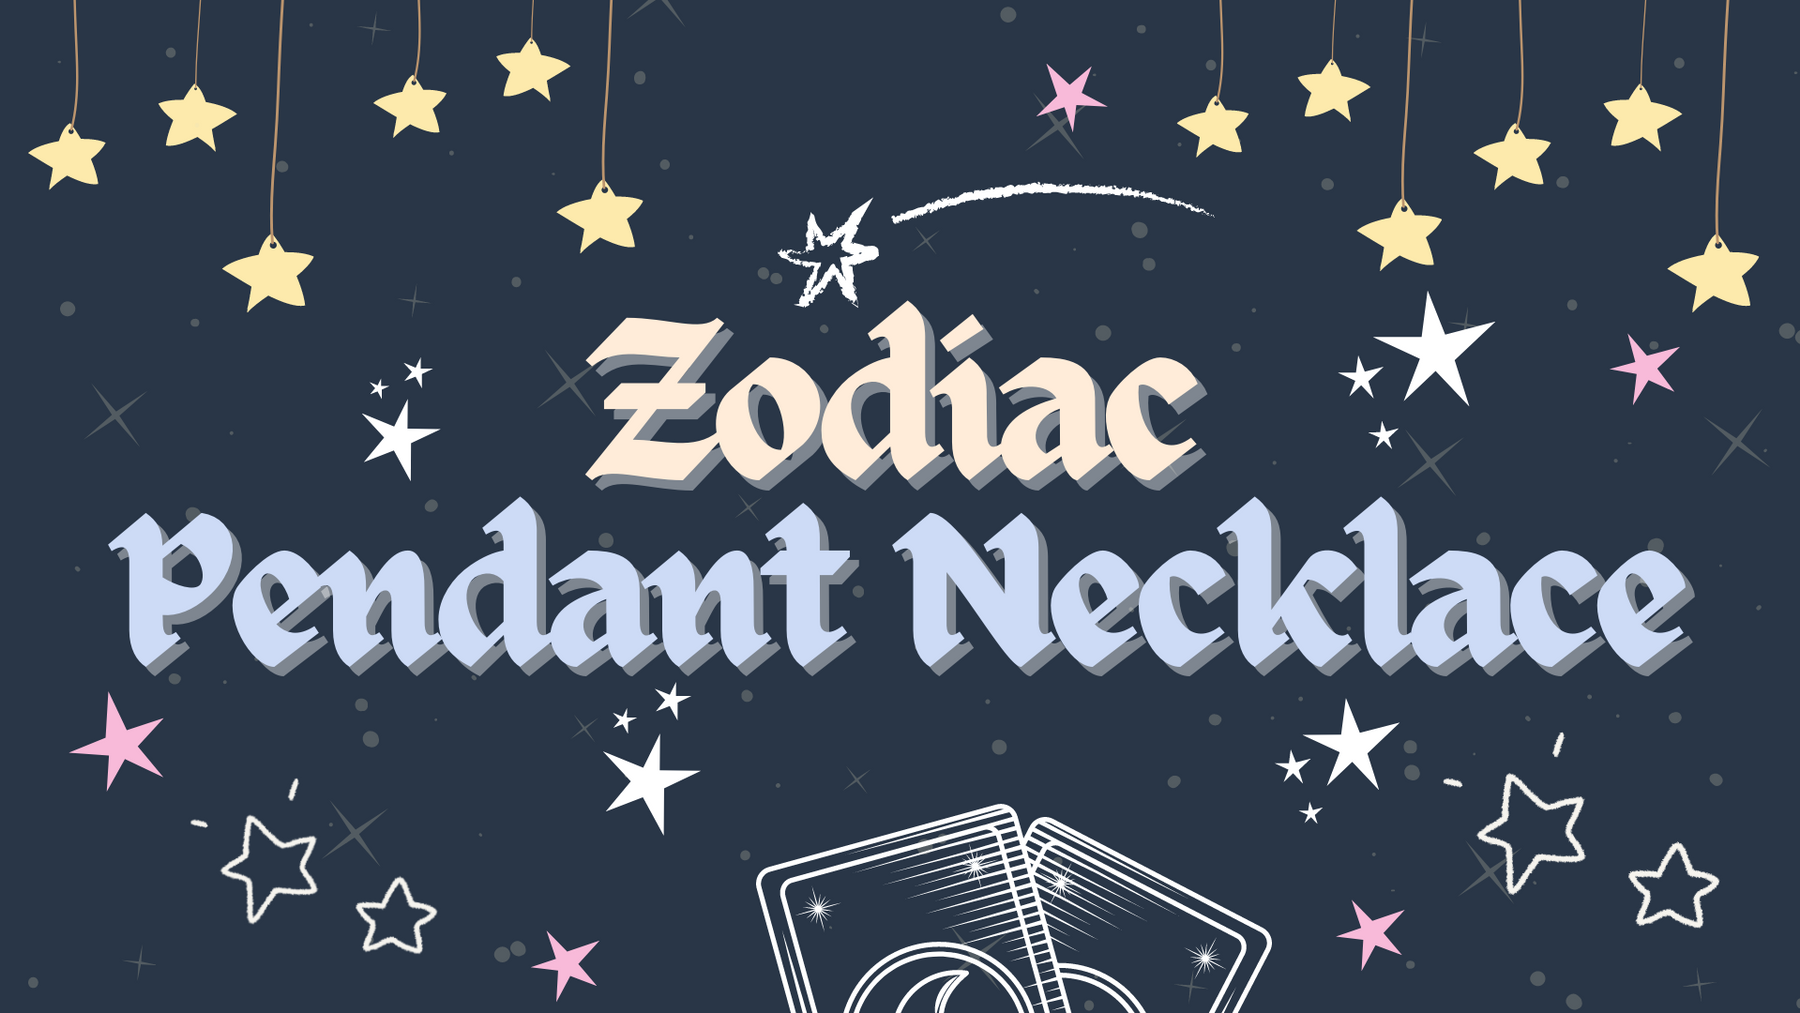 A Good Girl’s Guide to Zodiac Signs (ft. Zodiac Pendant Necklace)